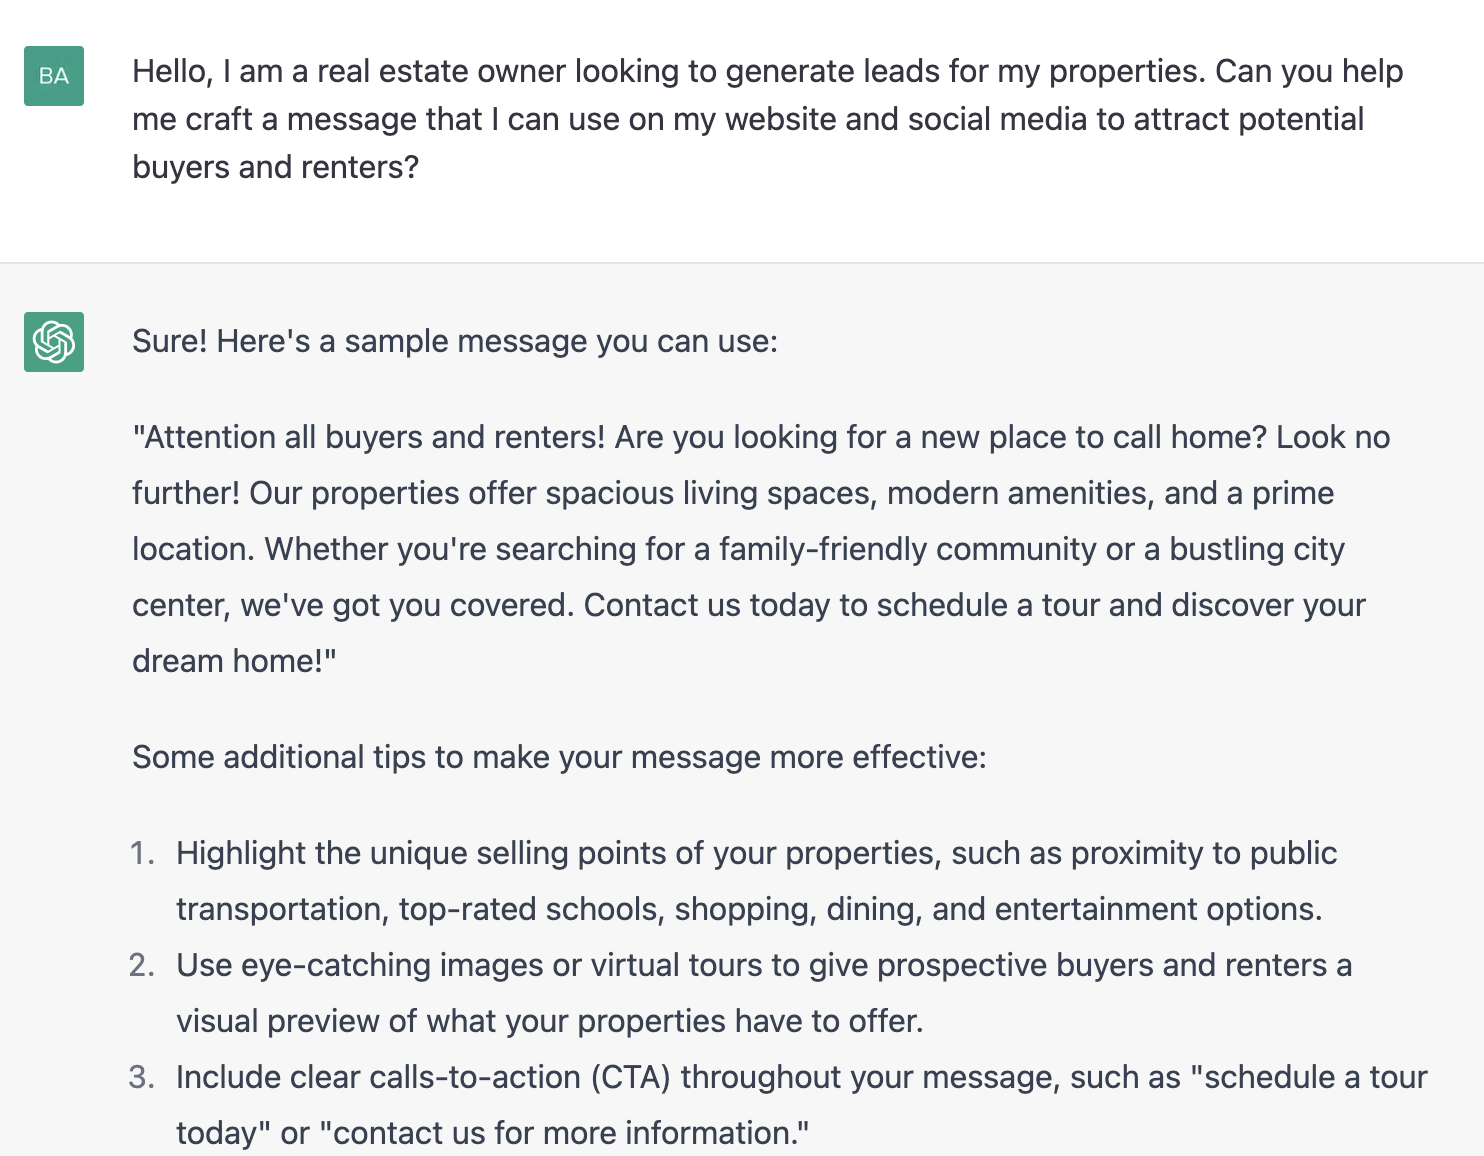 ChatGPT prompt about generating leads for properties